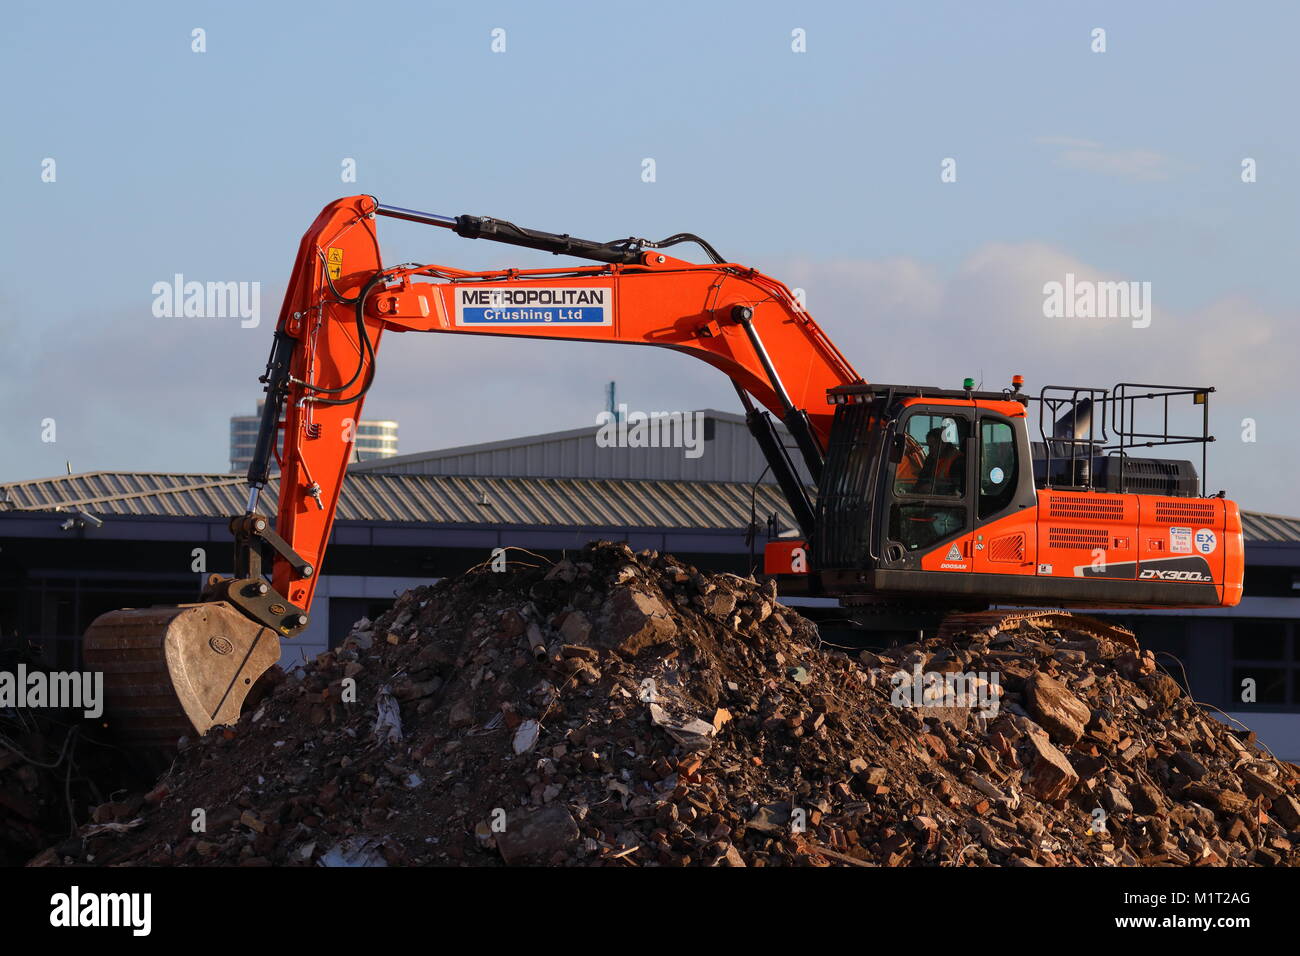 A Doosan excavator for Metropolitan Crushing Ltd heaps up rubble, ready to go into a crusher on the Thyssenkrupp site which closed down due to floods. Stock Photo